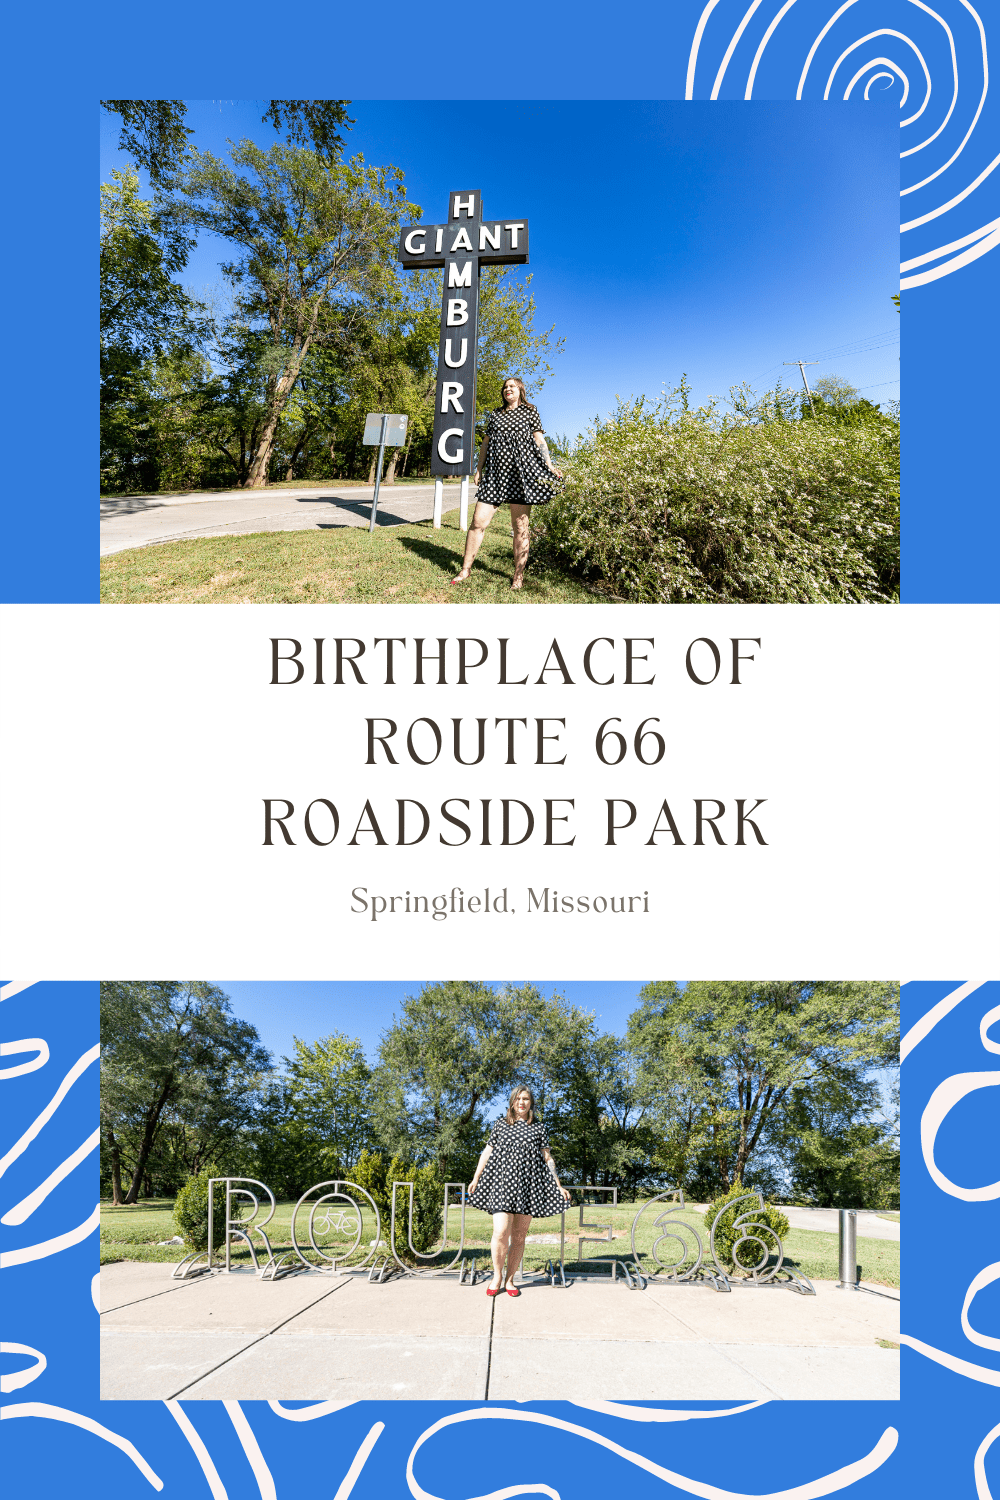 The Birthplace of Route 66 Roadside Park in Springfield, Missouri offers a small pullover with an homage to the past, a place to stretch your legs on a long Route 66 road trip.  The star attraction is a replica of the "Giant Hamburg" sign that was once a Route 66 attraction in itself.   #Route66 #Route66RoadTrip #Missouri #MissouriRoadTrip #RoadTrip #RoadsideAttraction #RoadsideAttractions #MissouriRoadsideAttraction